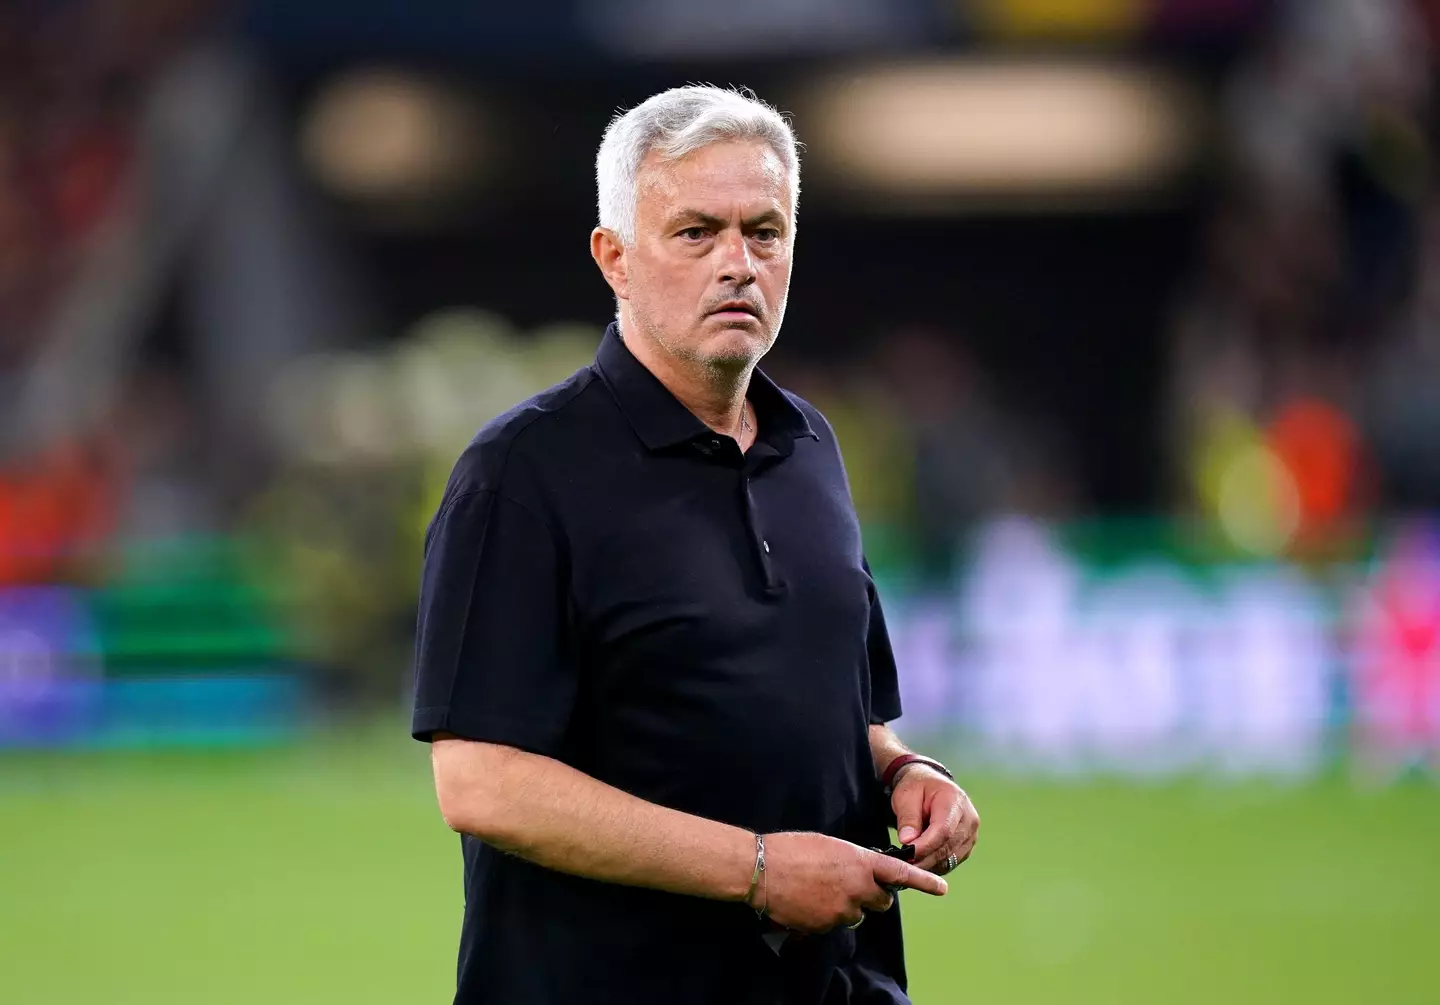 Mourinho was incensed during Wednesday's final. (Image: Alamy)